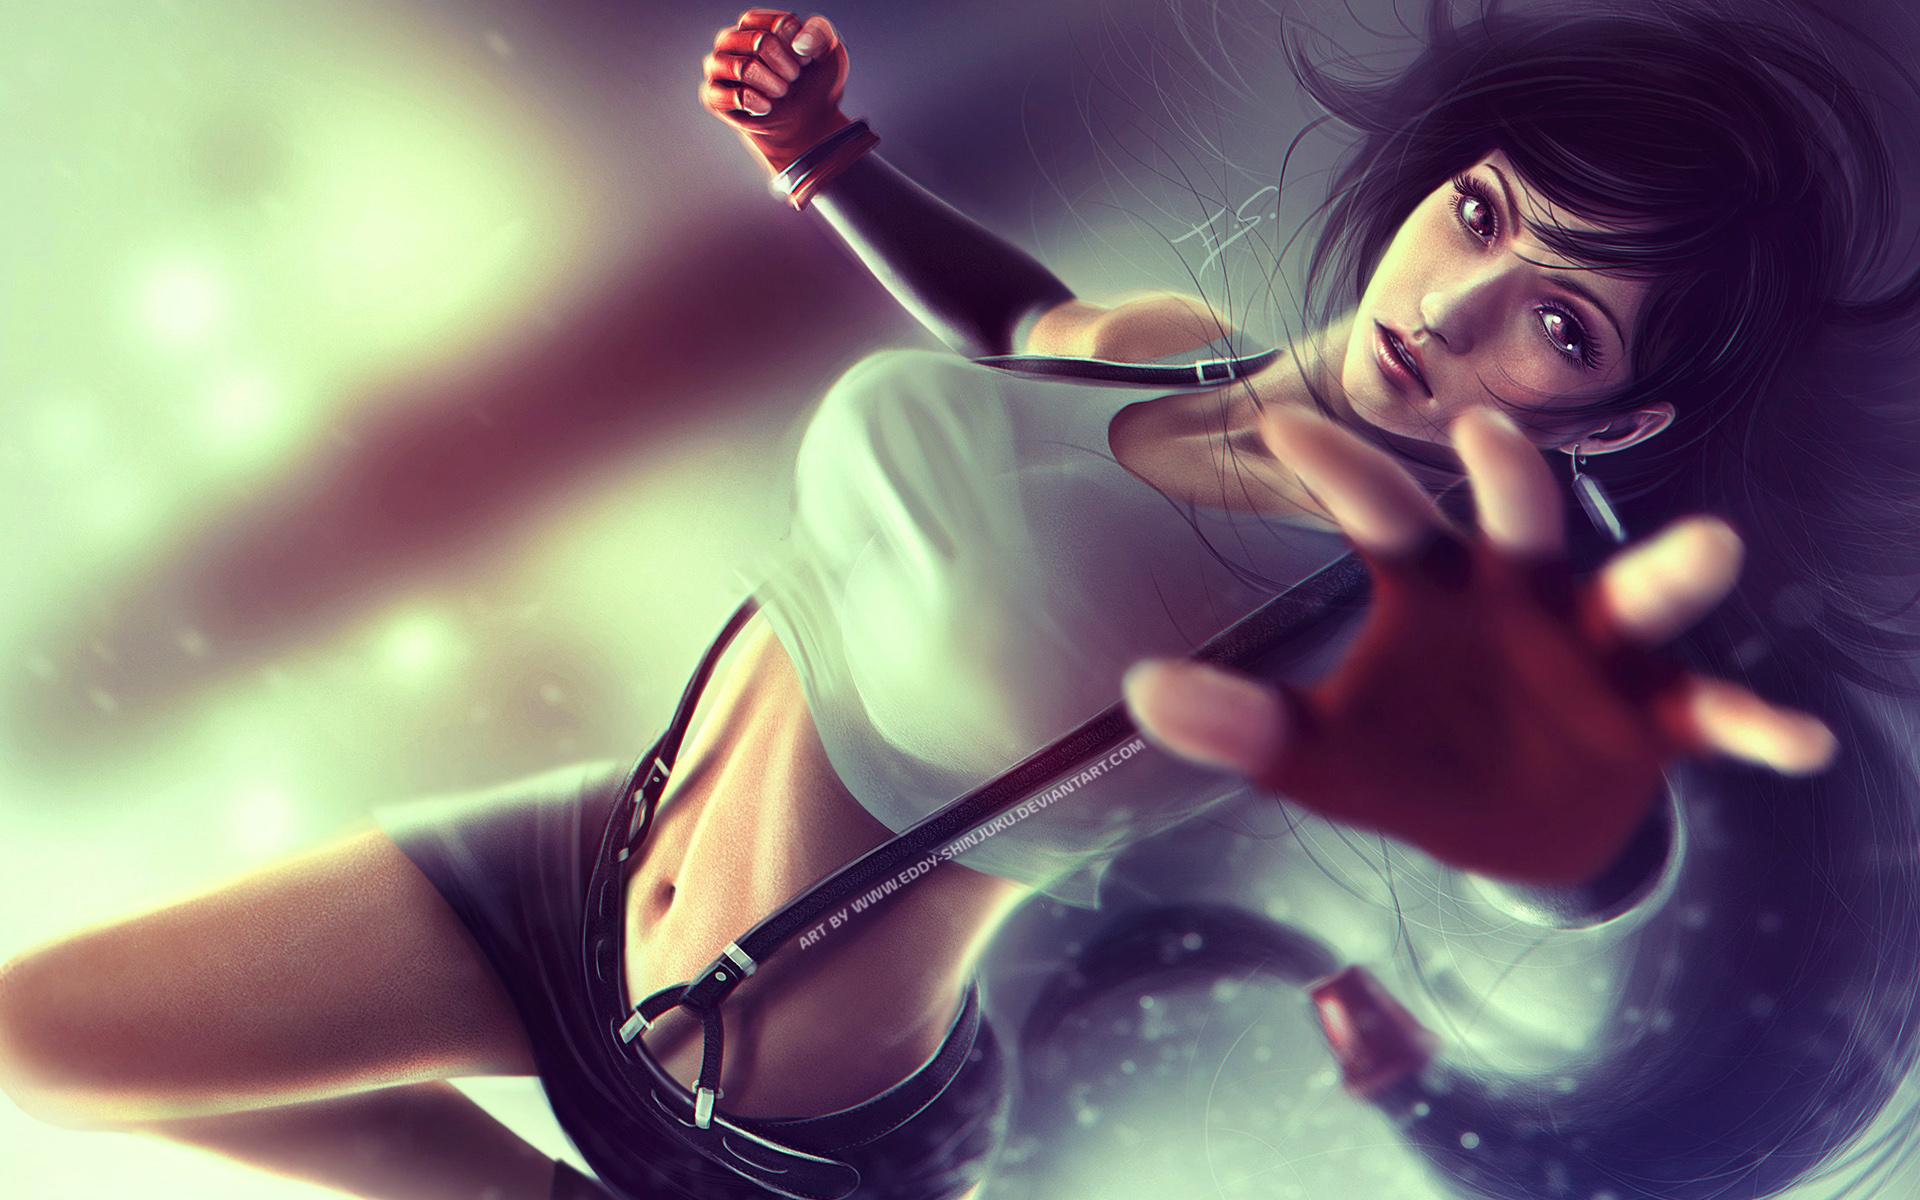 tifa 4K wallpaper for your desktop or mobile screen free and easy